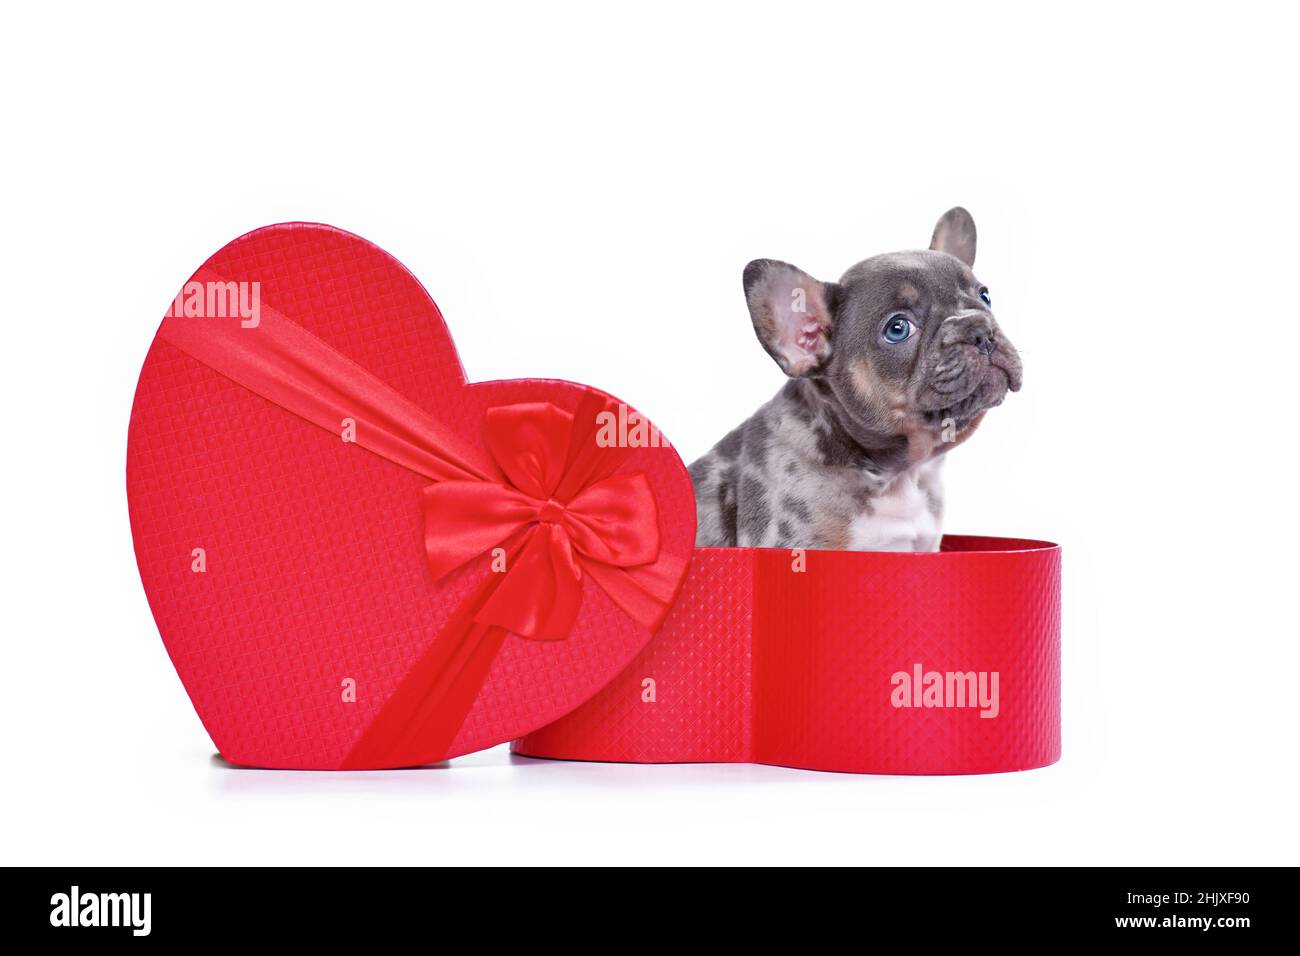 French Bulldog dog puppy in Valentine's Day gift box in shape of red heart on white background Stock Photo